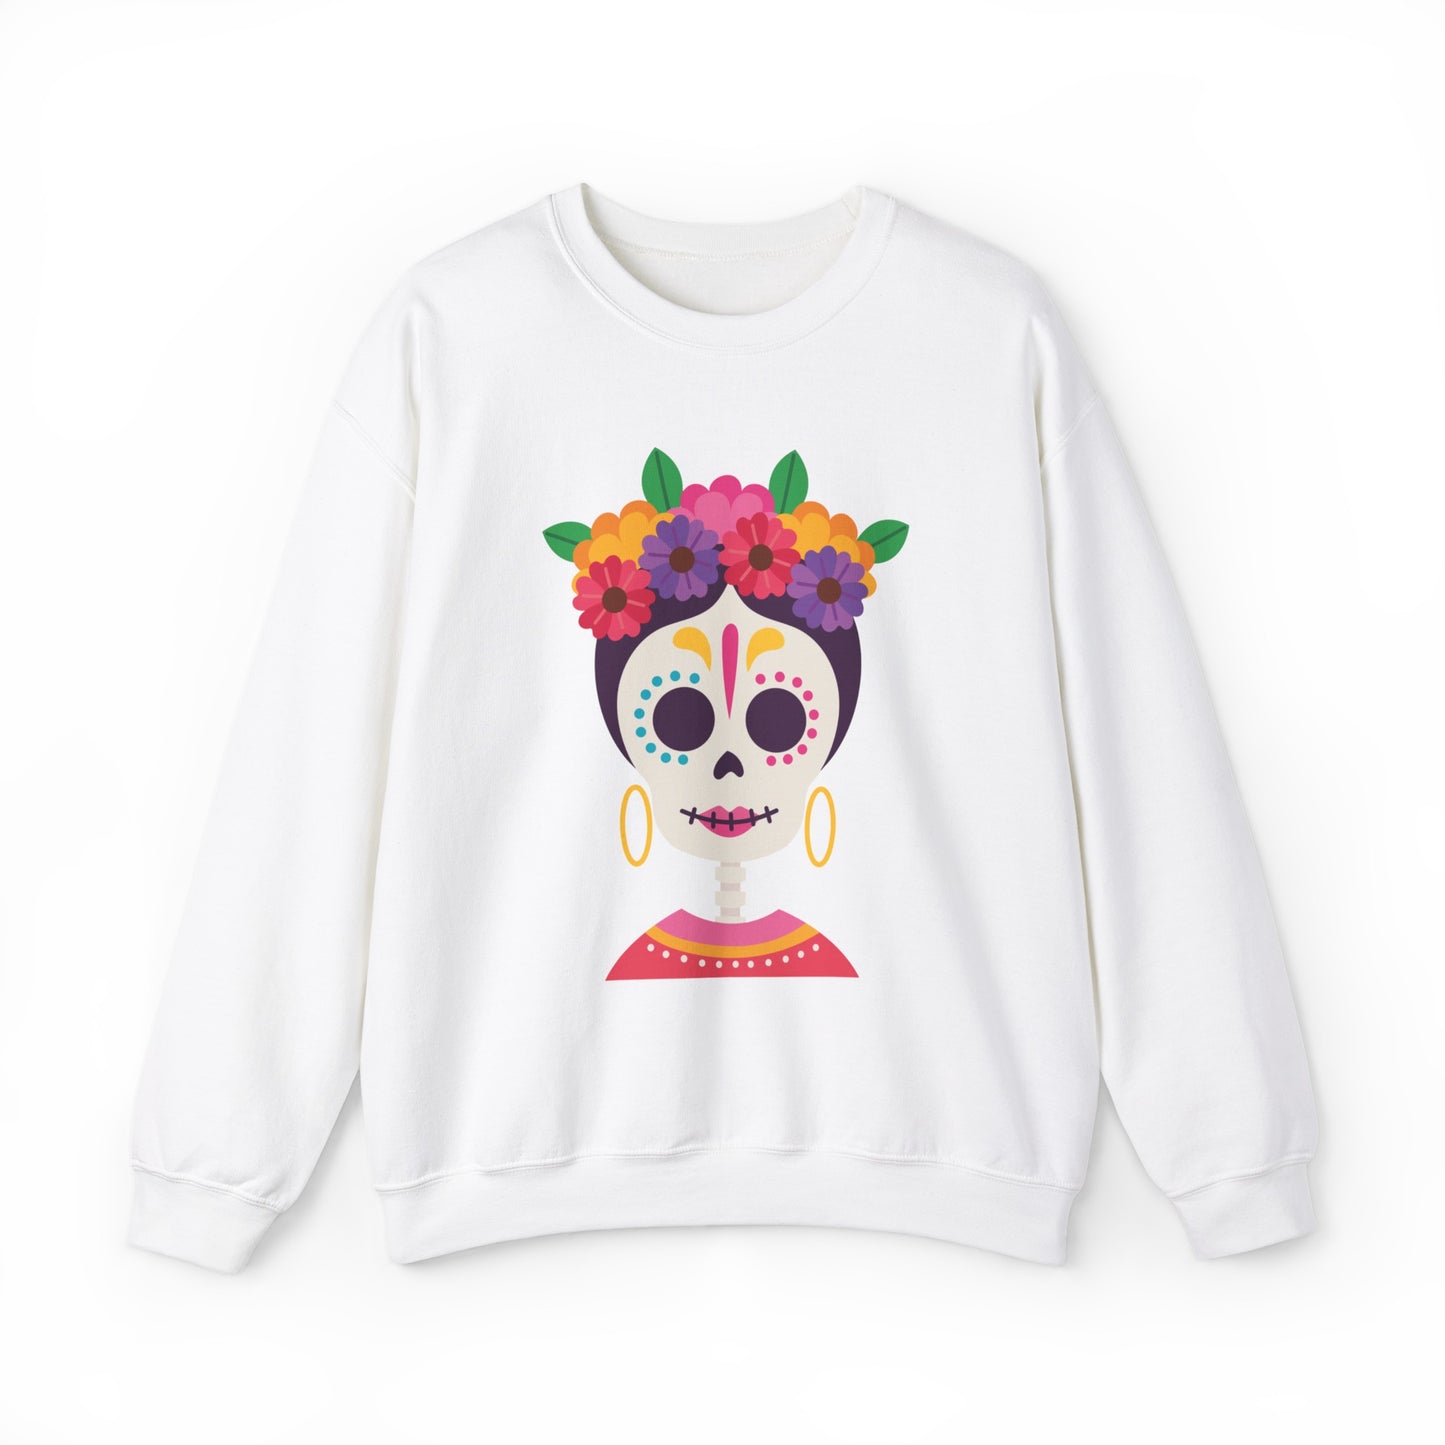 Personalized premium sweatshirt for her, comfort and style, catrina design, mother's day, gifts for her